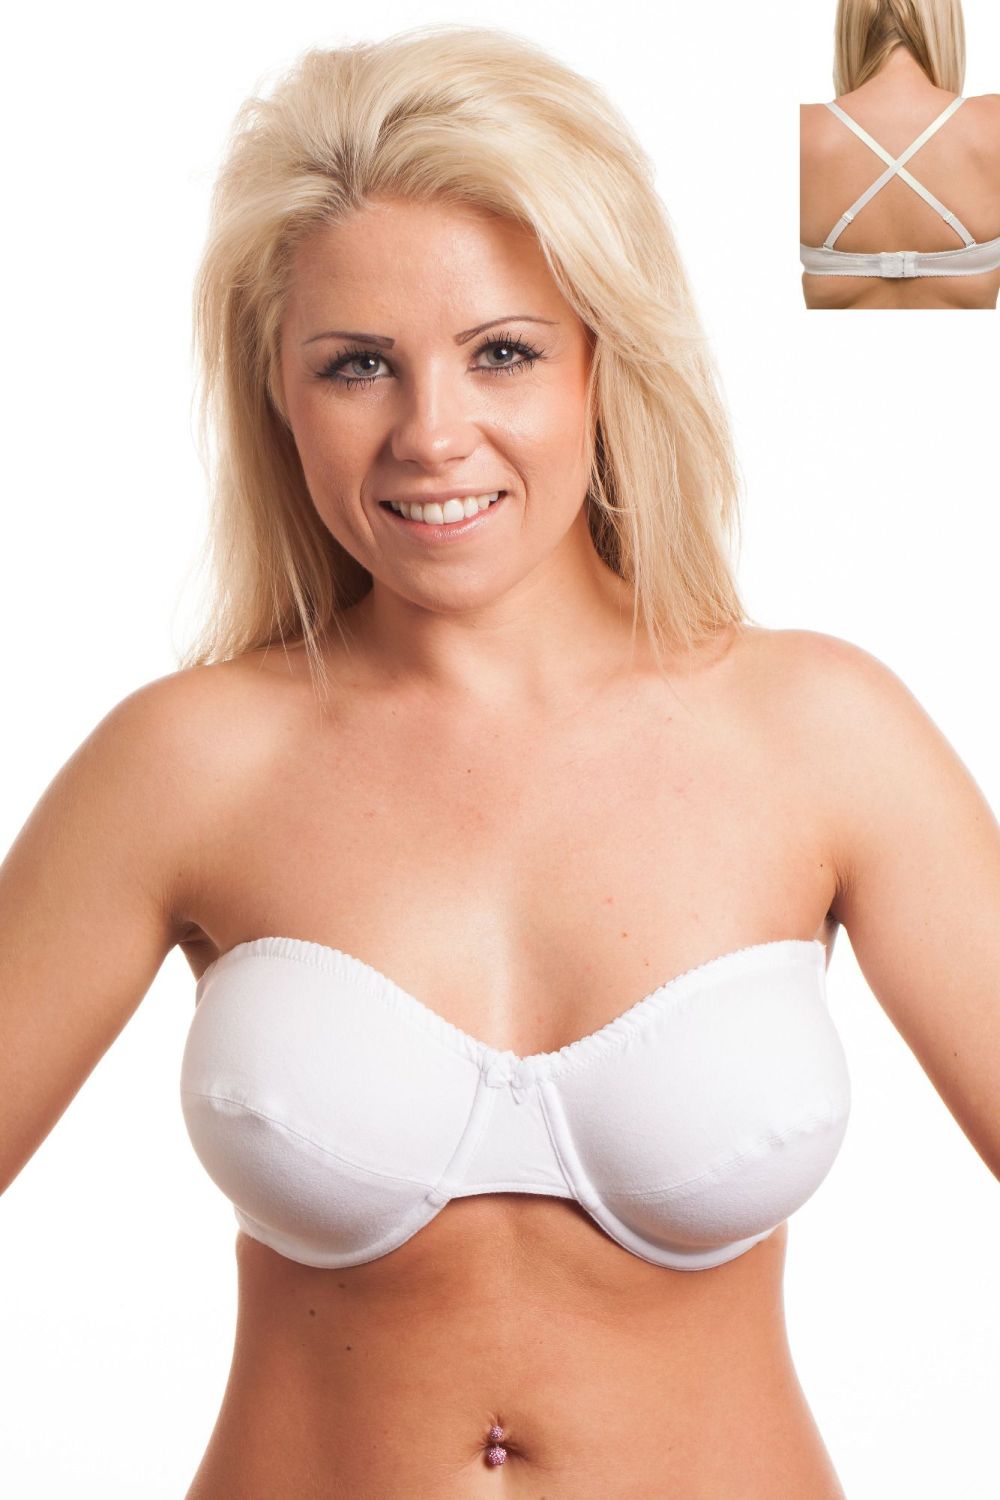 MW295 - 30 COTTON Strapless Bras - only £3.60 Each